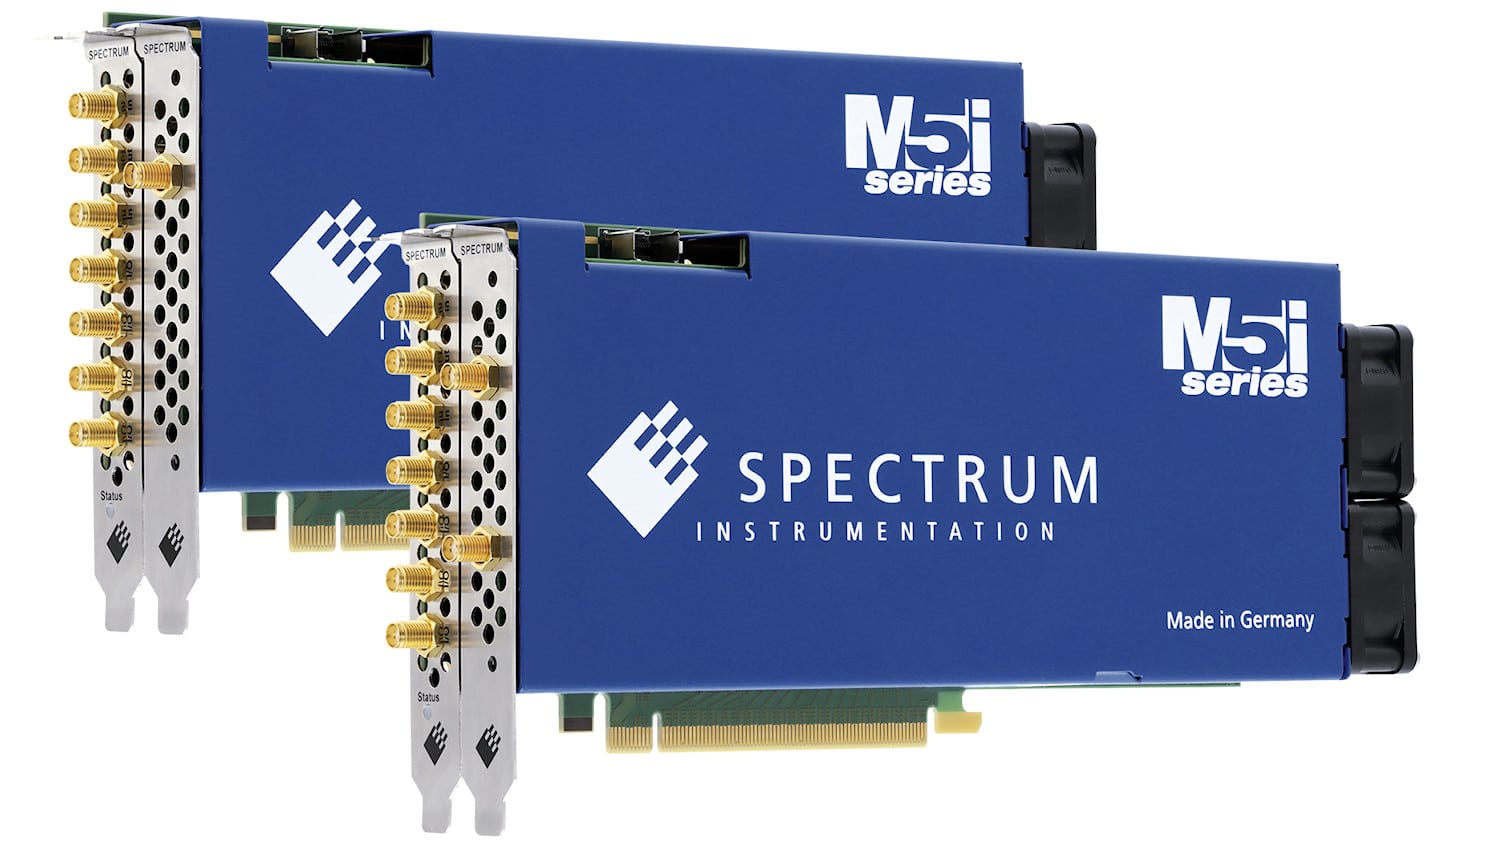 PCIe Digitizer Cards With High-Speed Unmatched Bandwidth And Features